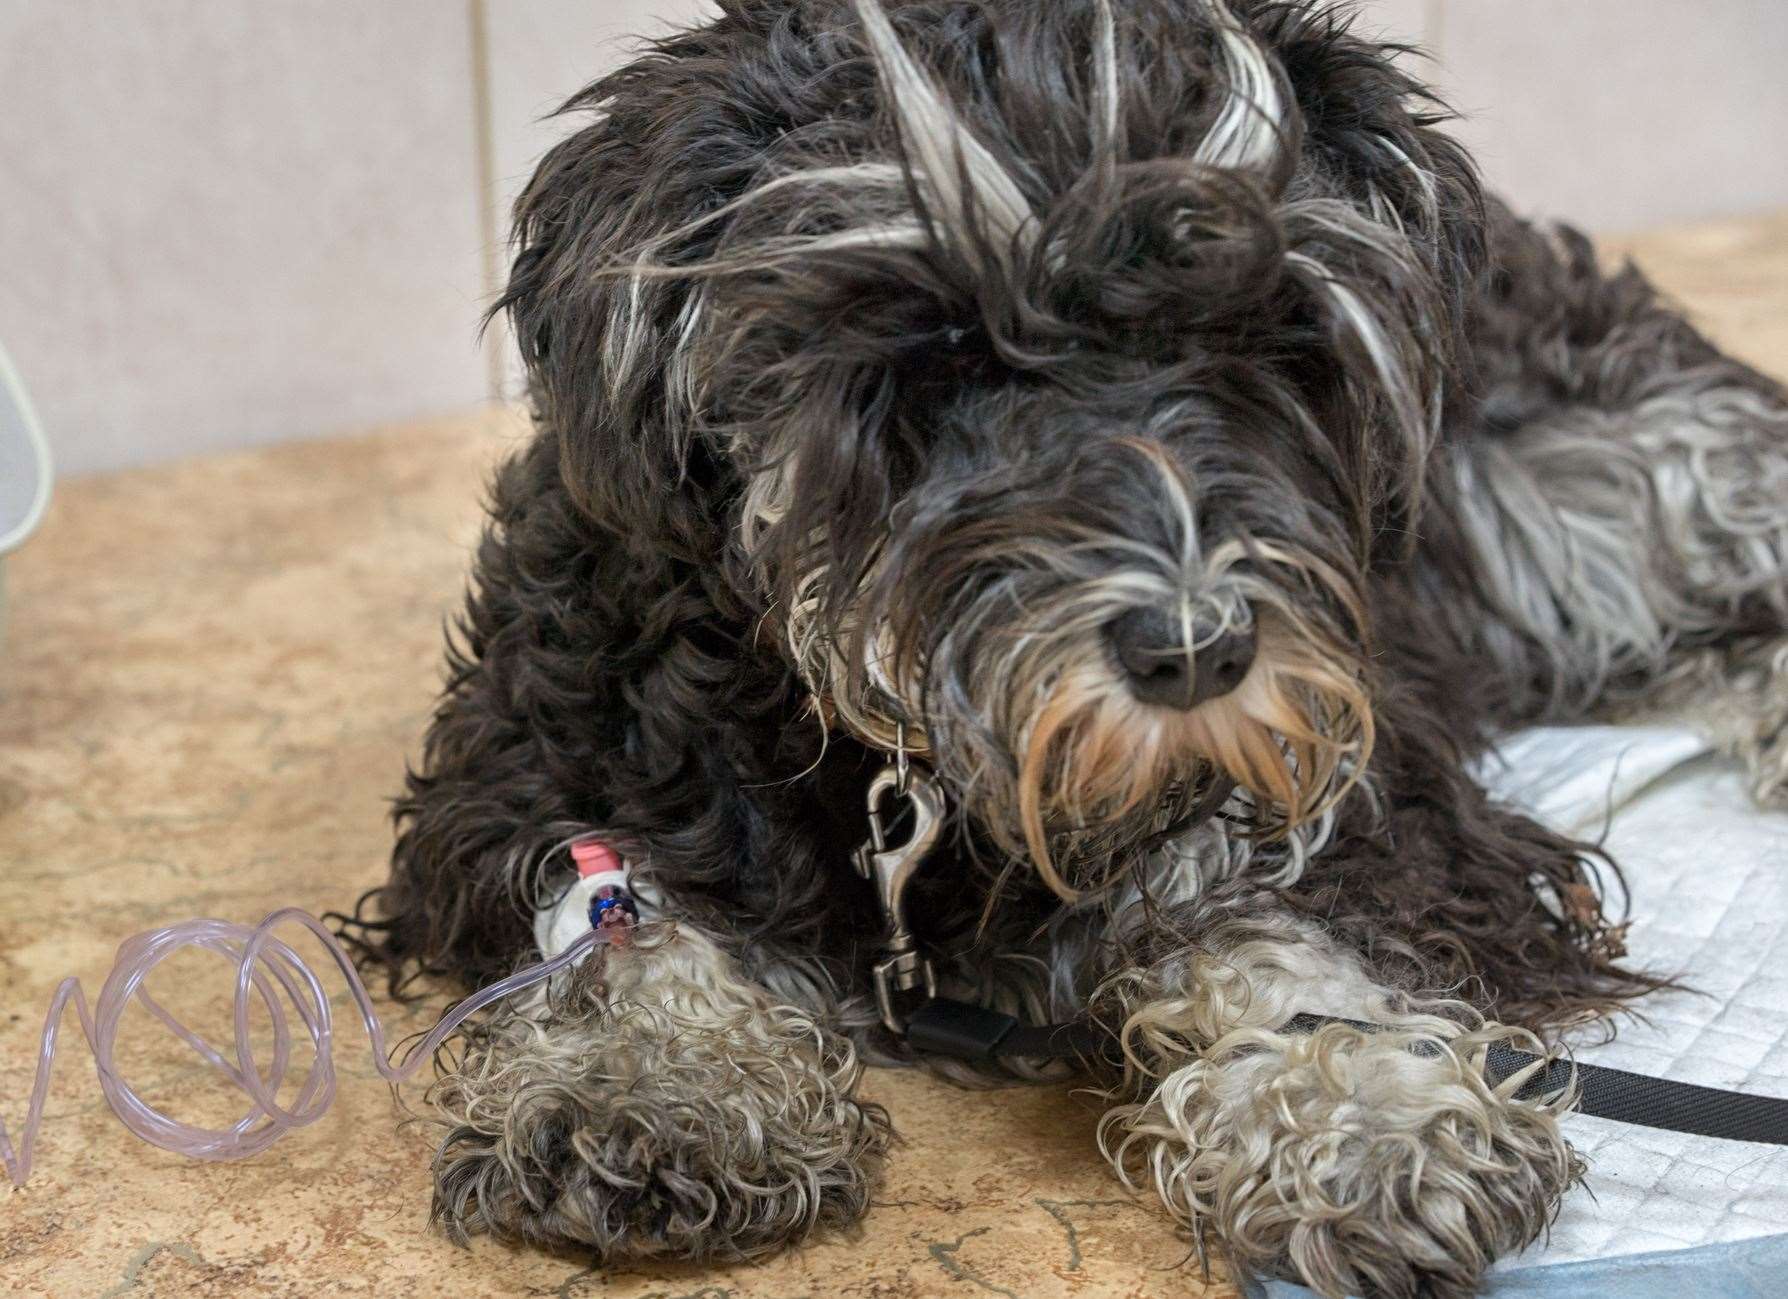 The RSPCA says it needs to focus on sick, injured or mis-treated animals. Photo: iStock.